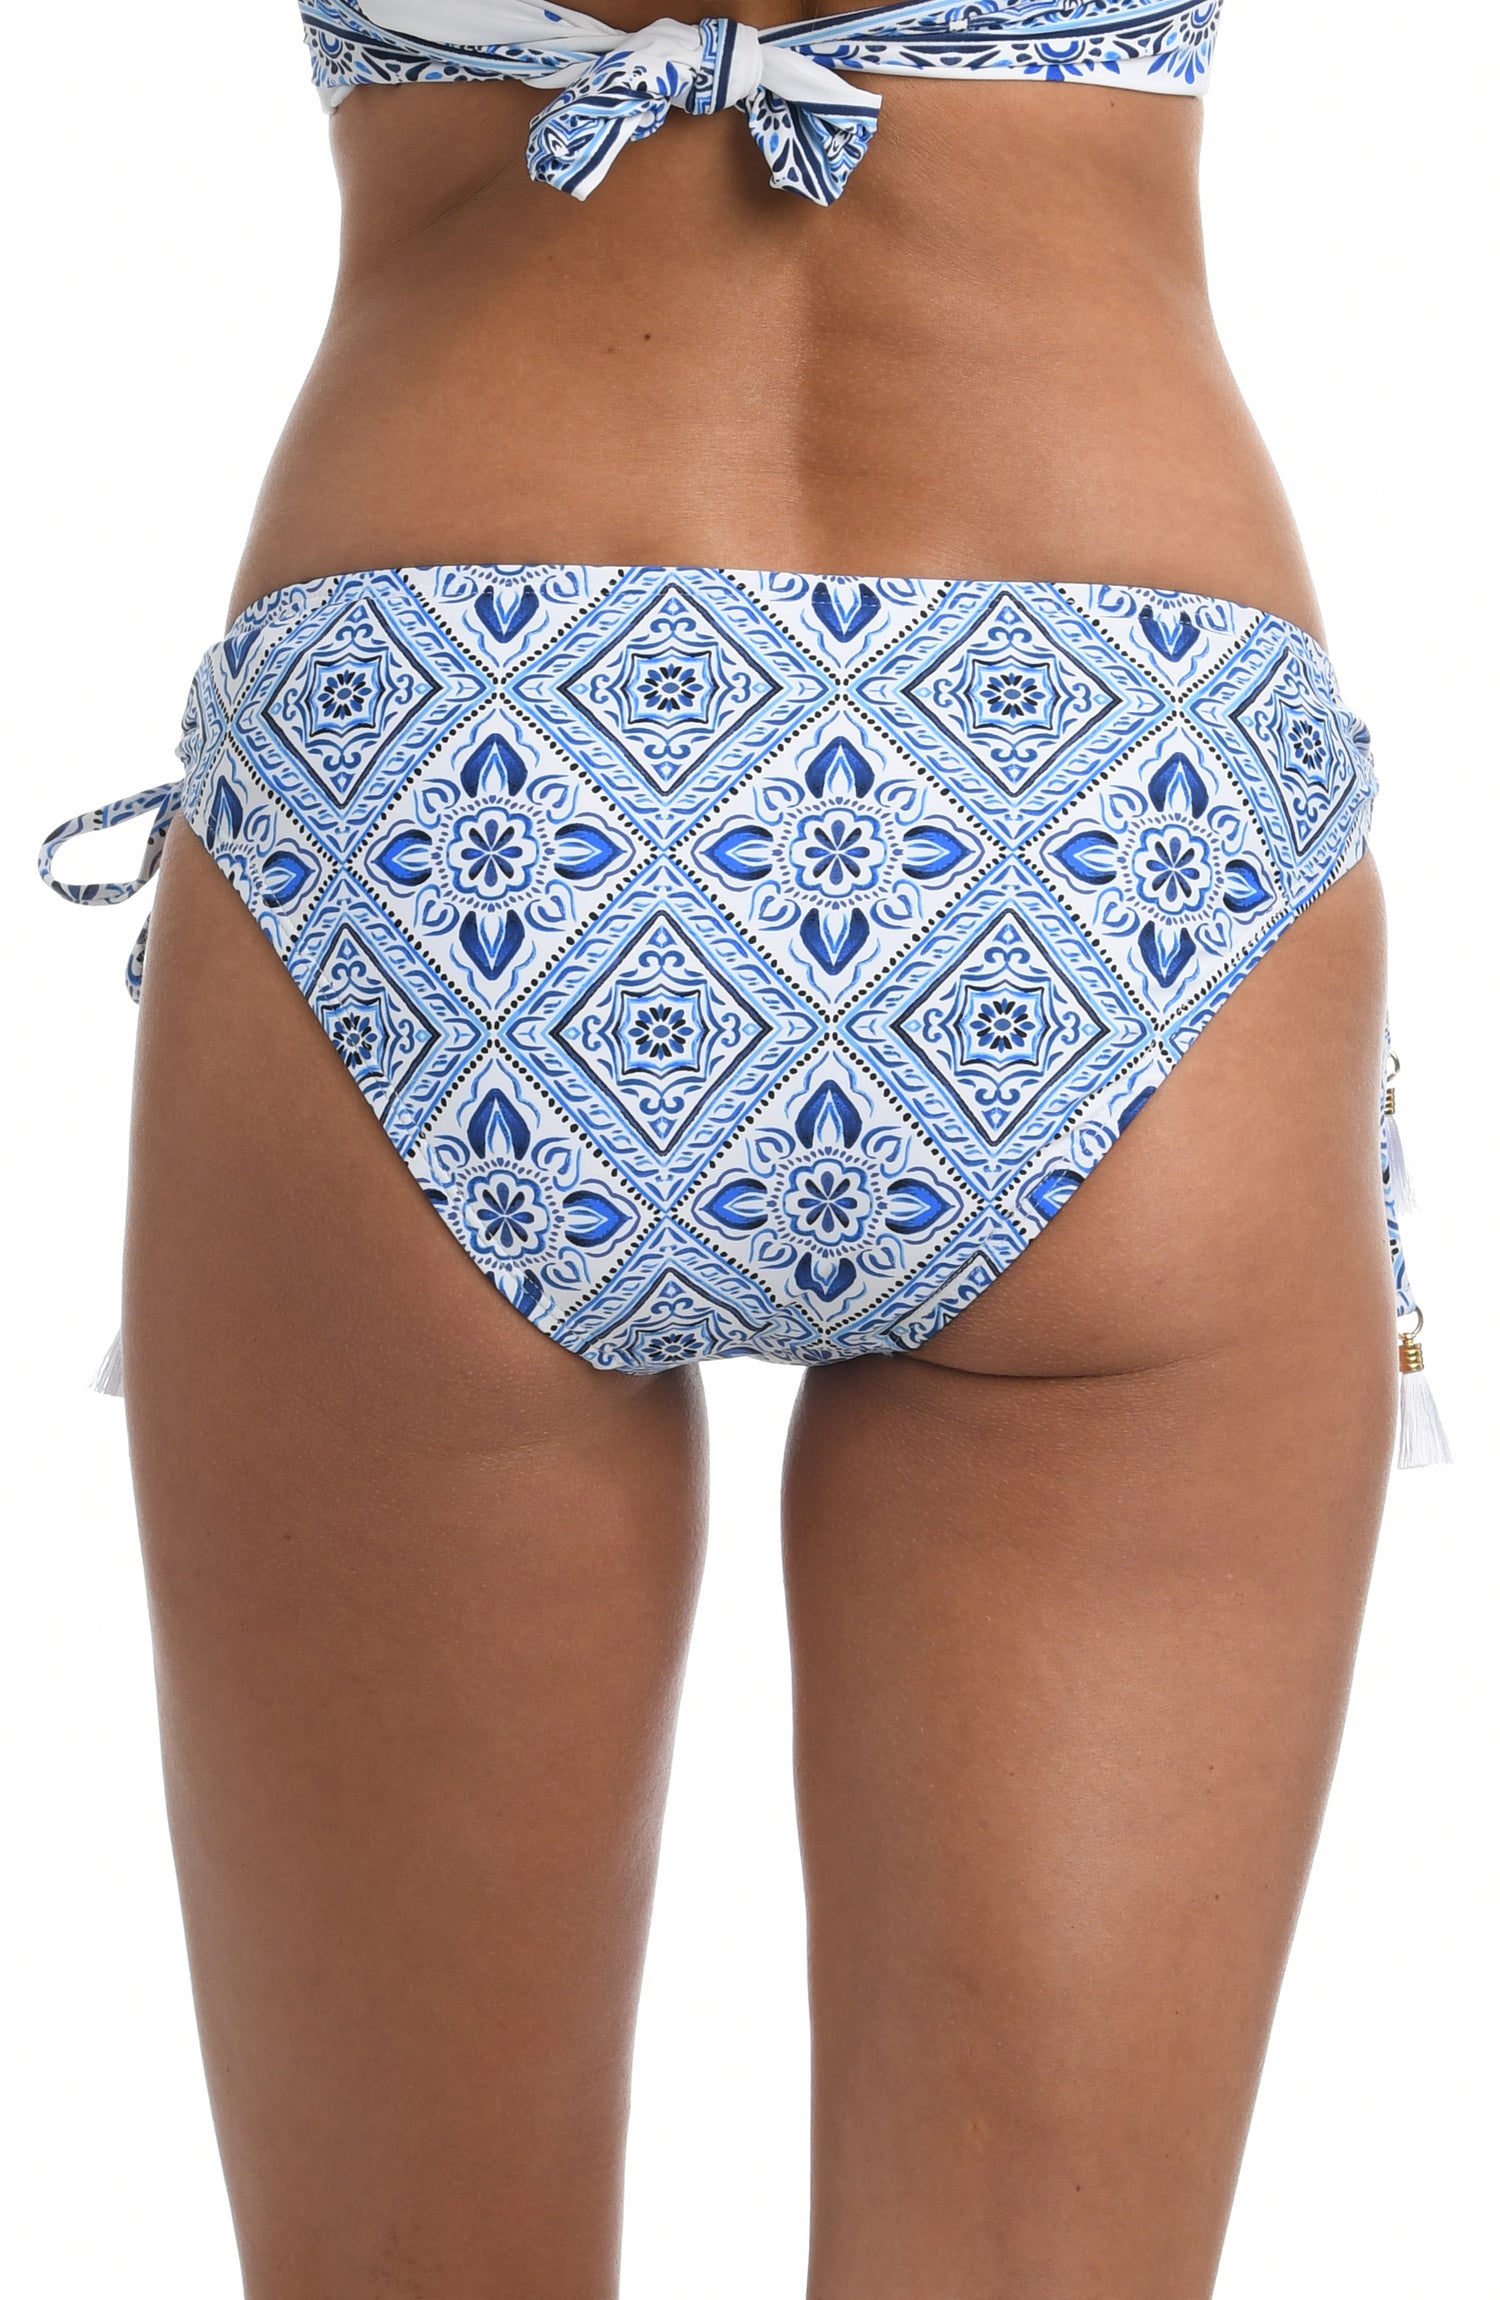 Model is wearing a light blue artful mosaic printed side-tie hipster swimsuit bottom from our Mediterranean Breeze collection.